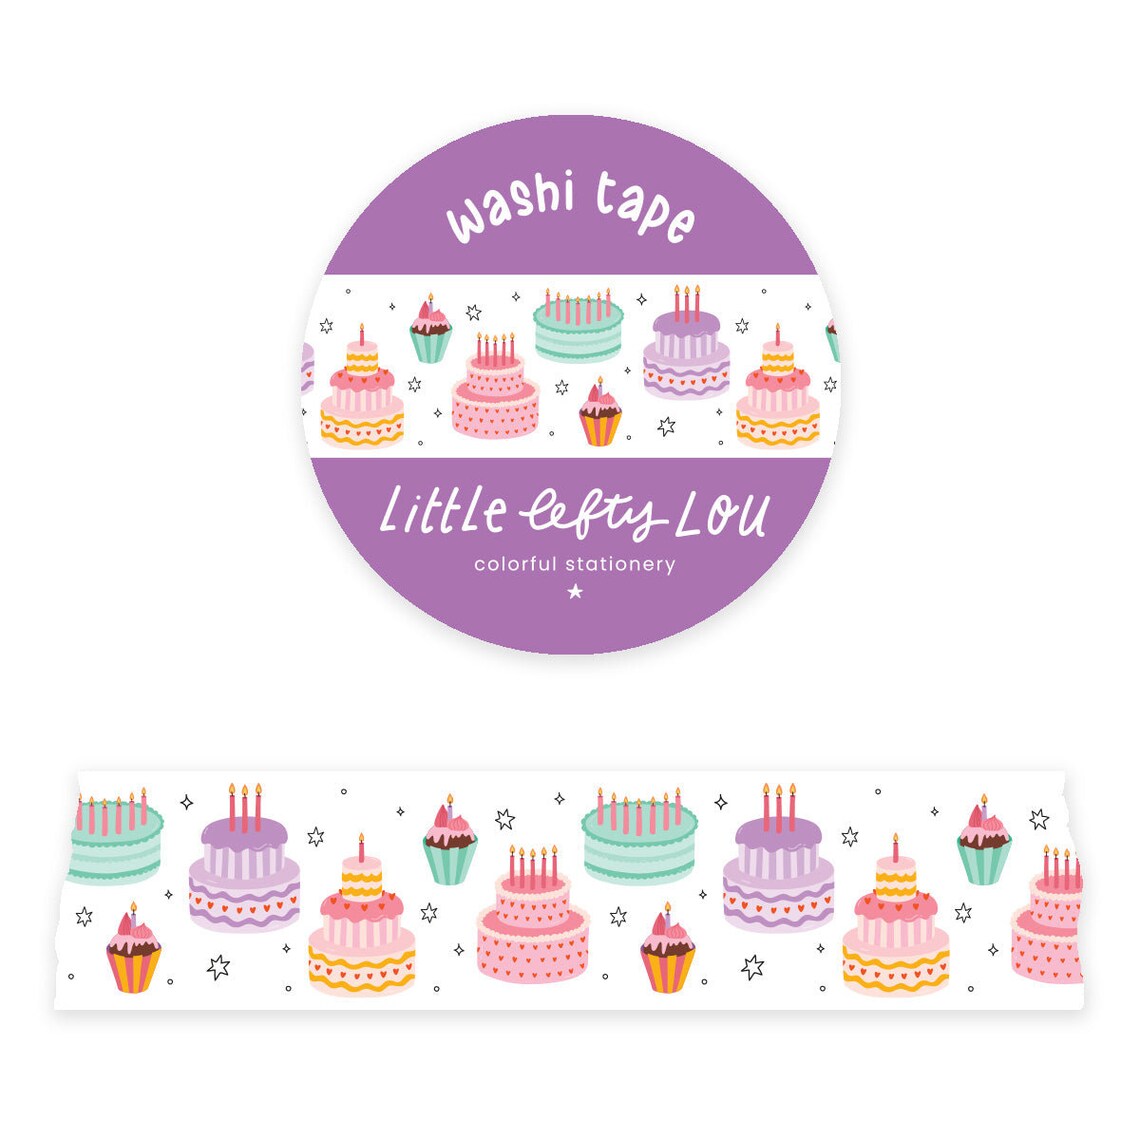 Birthday Cake Wide Washi Tape by Little Lefty Lou